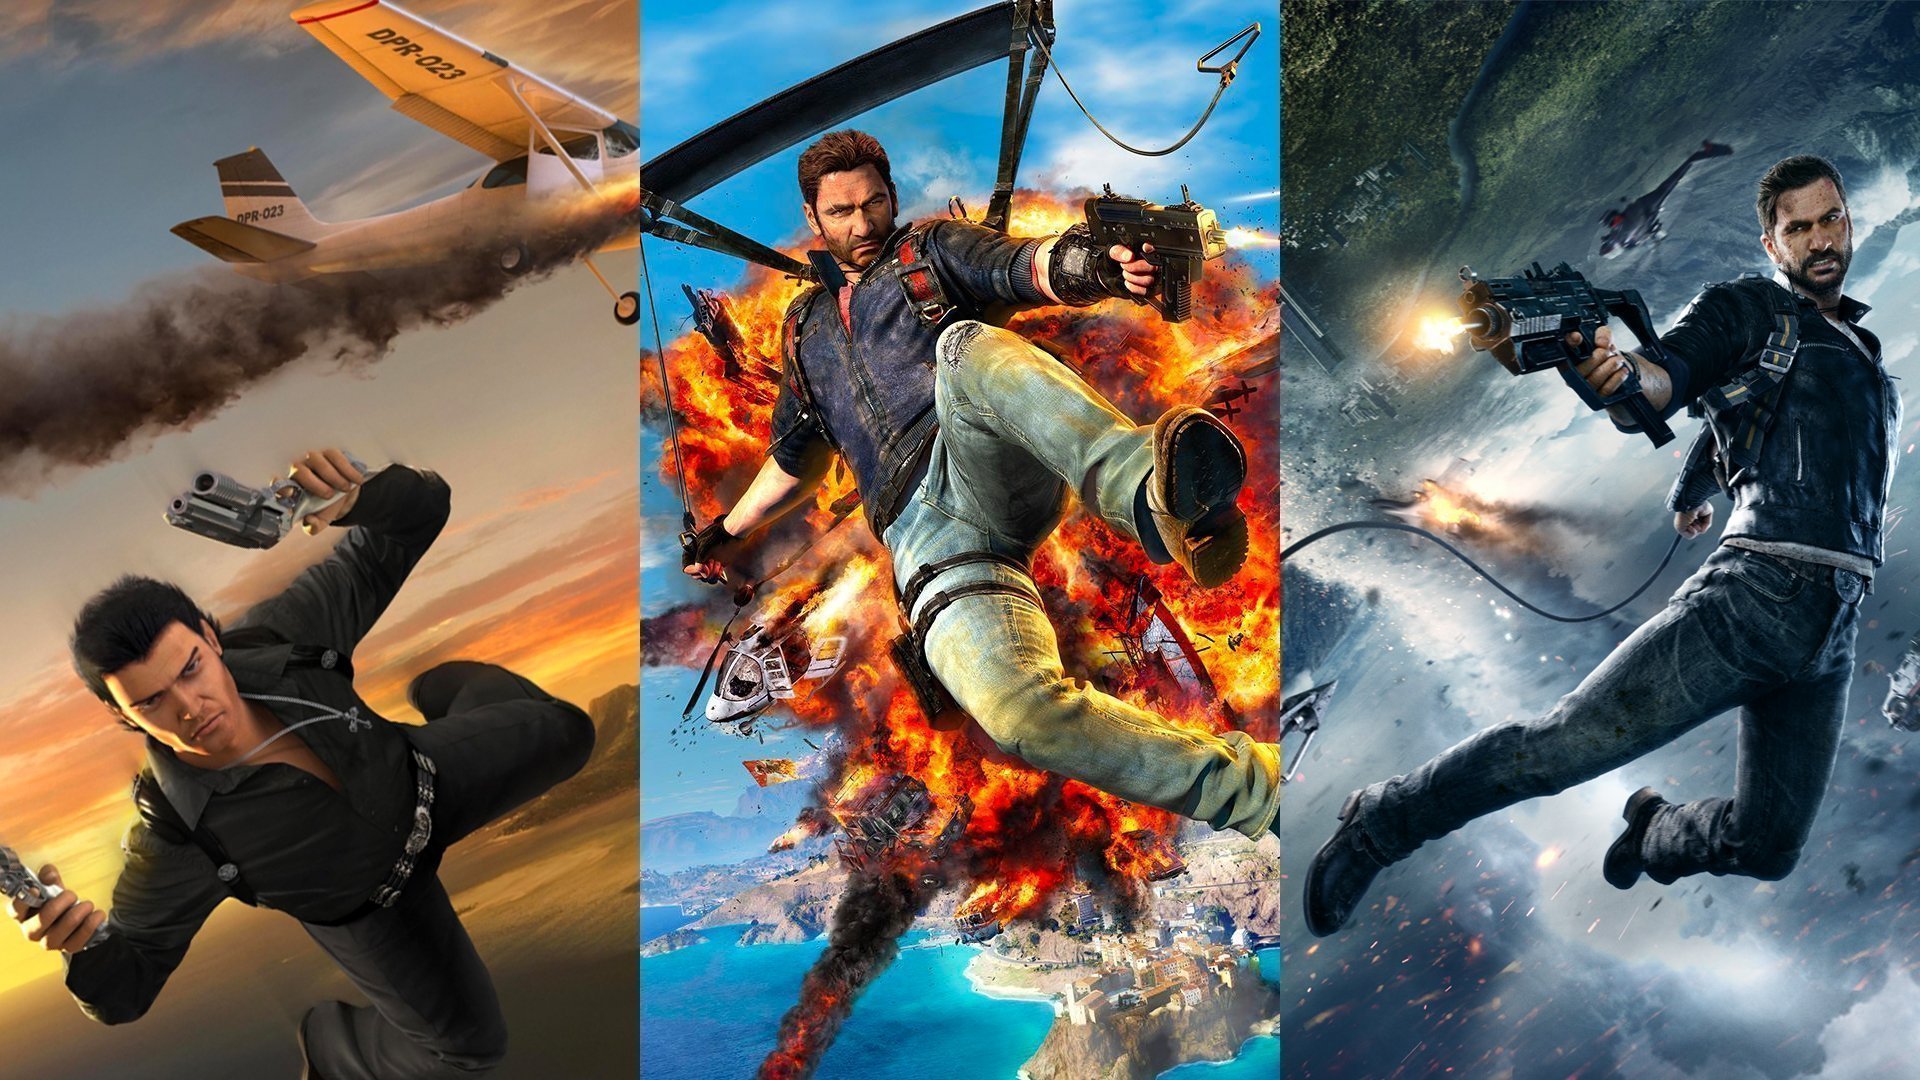 Play Just Cause 3 for Free Oct. 30 to Nov. 5 with Xbox Live Gold Image1-3.jpg